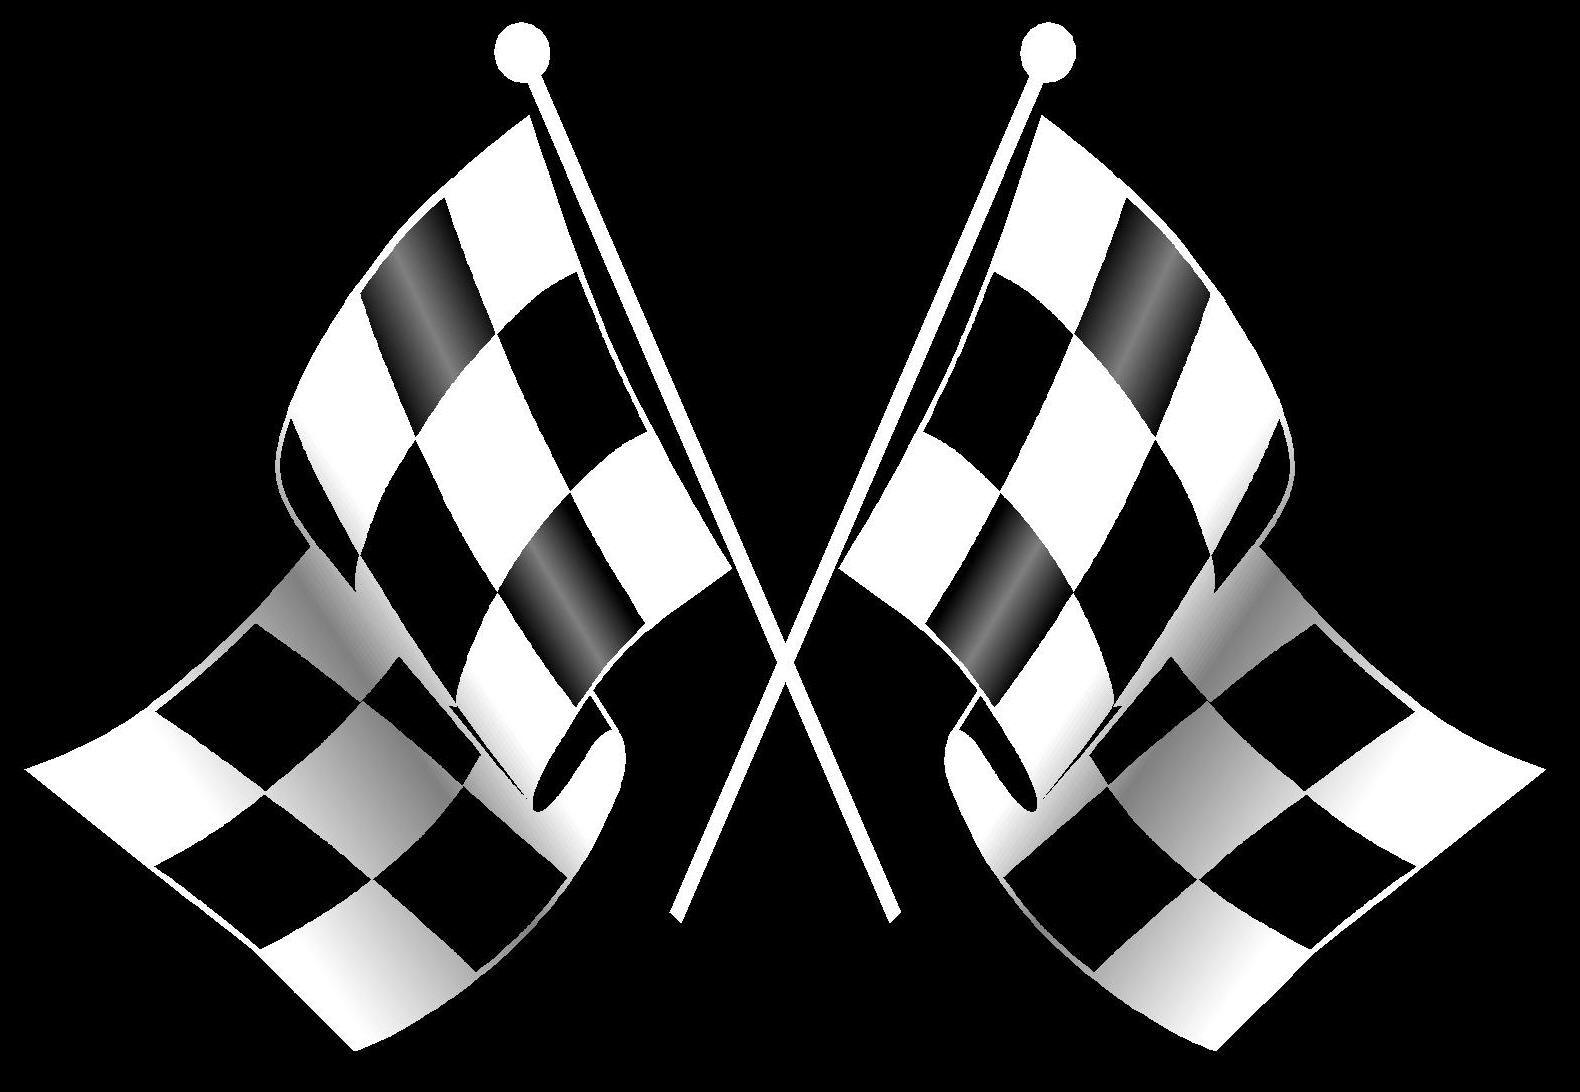 Plaid &amp; Checkered Patterns - About Graphics Software
 - Tutorials